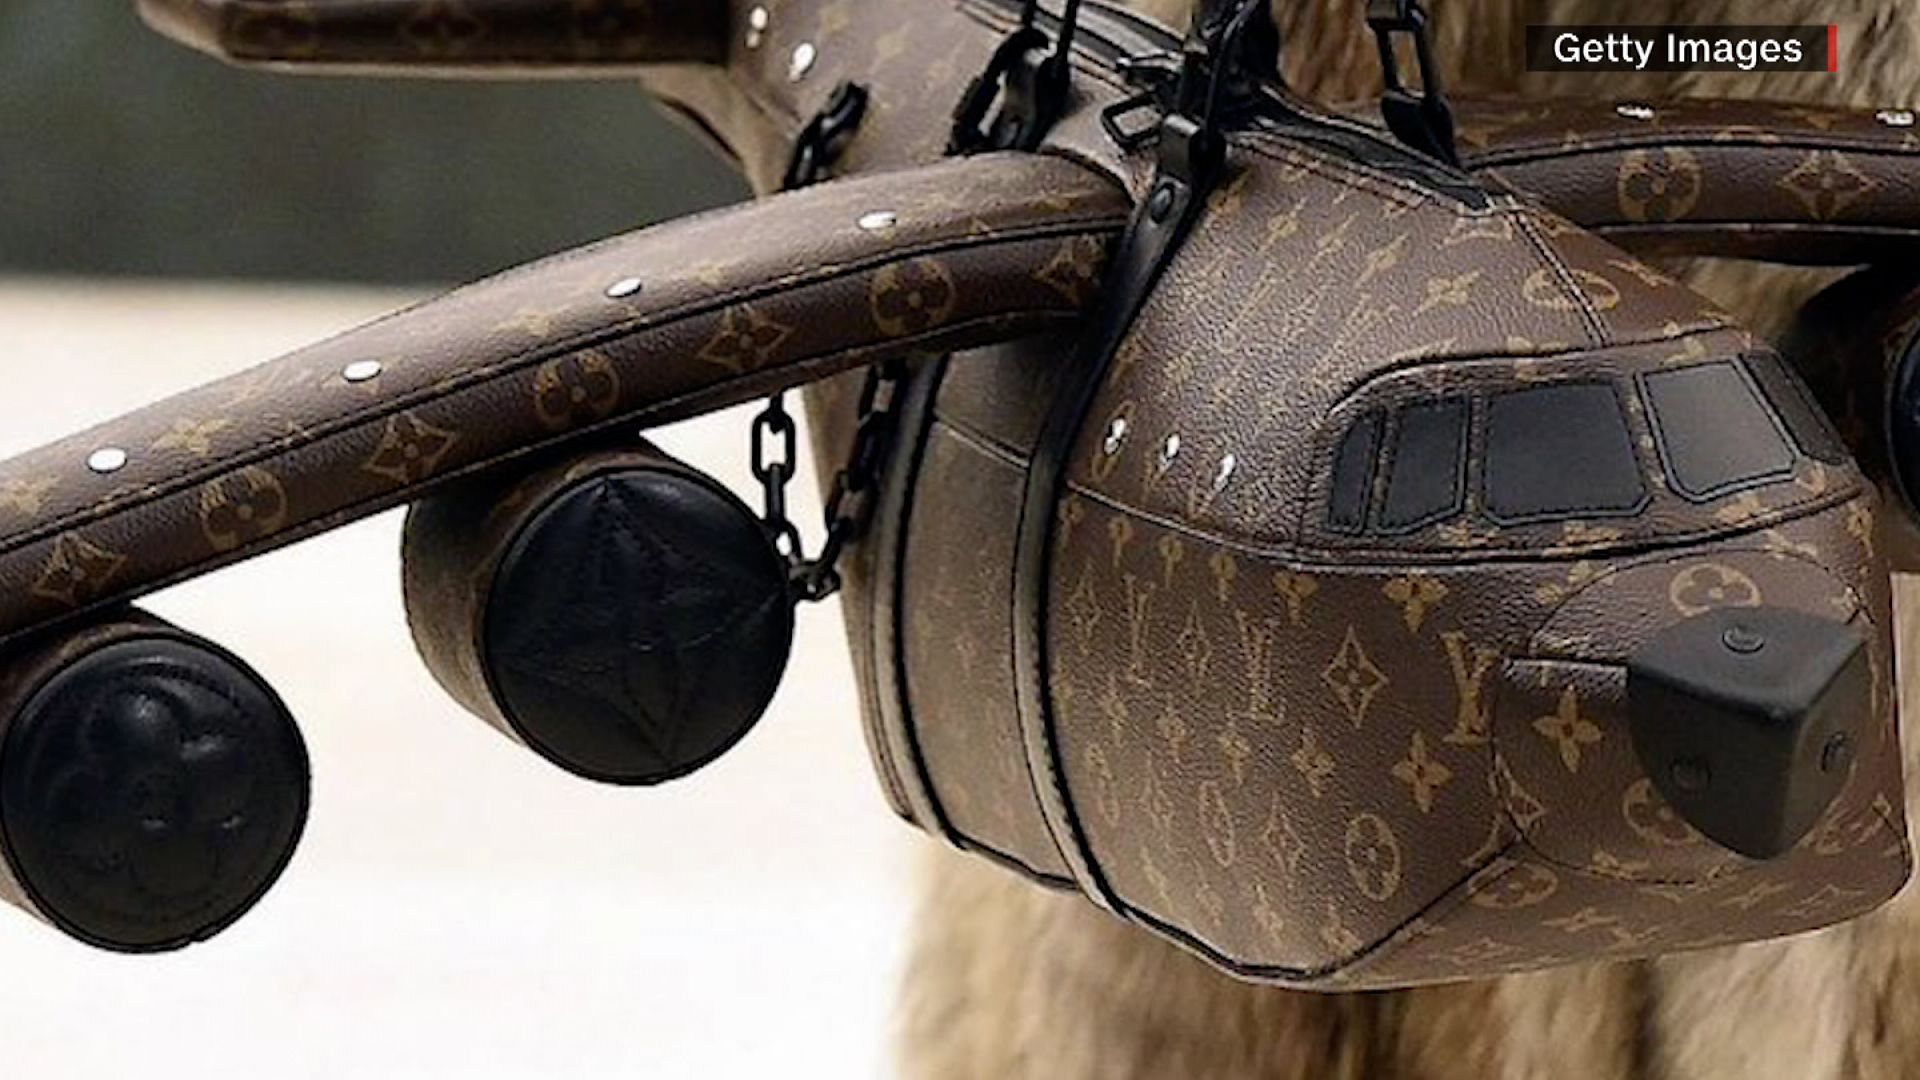 Louis Vuitton Is Selling “Airplane Bags” For Rs 29 Lakhs, People Say “Isse  Kam Me Plane Mil Jayega” - RVCJ Media